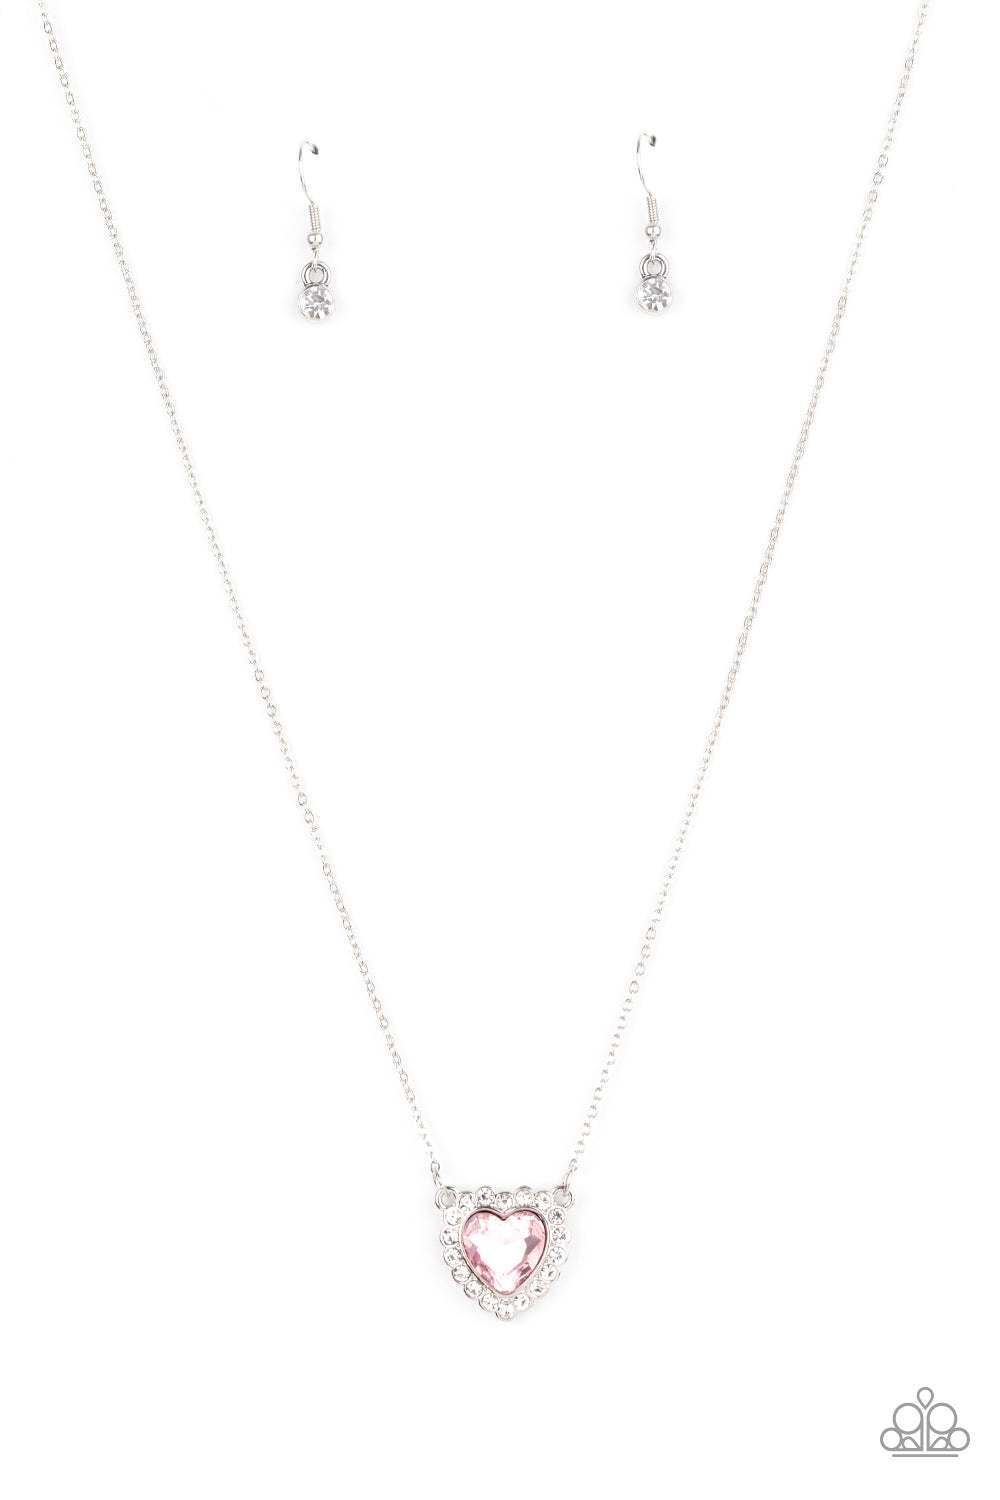 Out of the GLITTERY-ness of Your Heart - Pink - Paparazzi Necklace